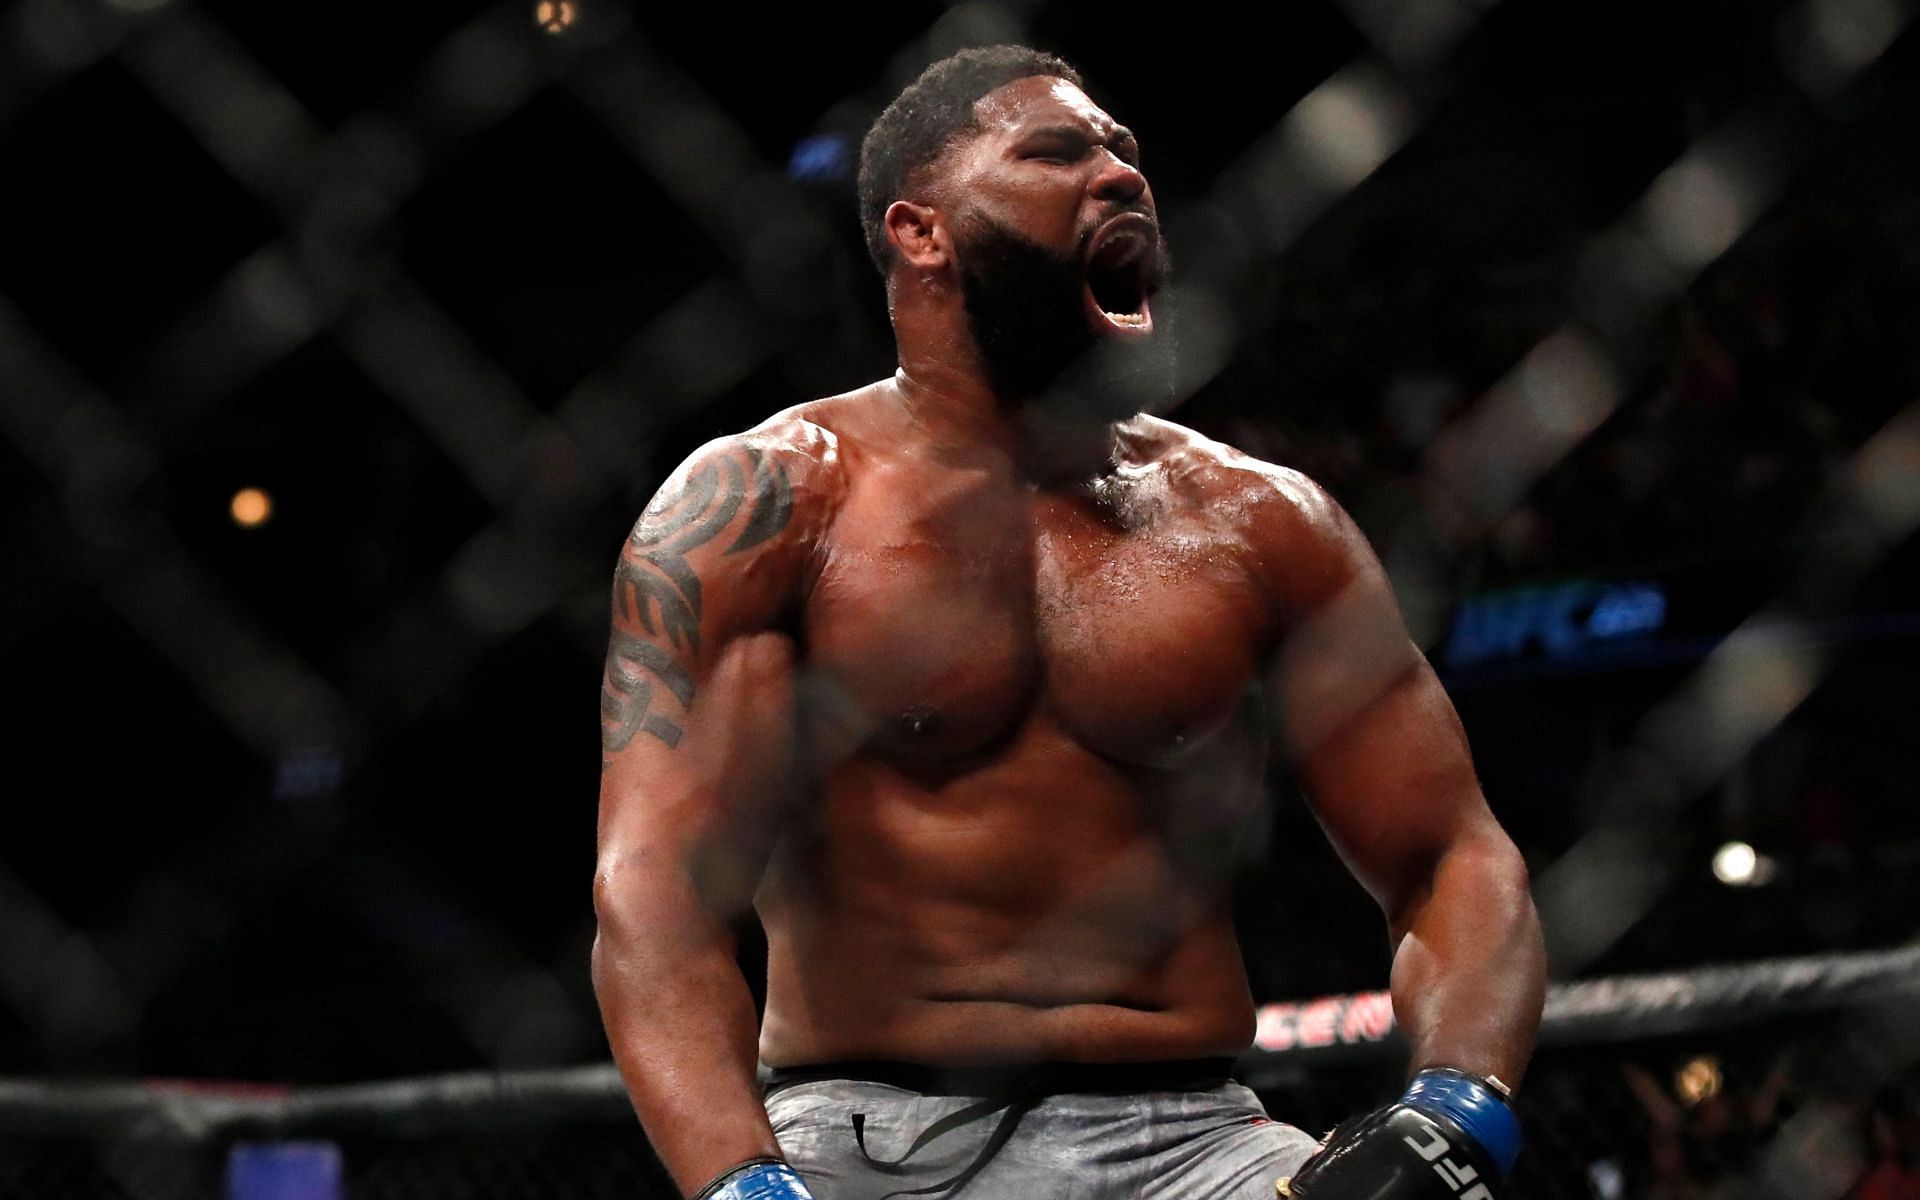 Is Curtis Blaydes the most underrated heavyweight in the UFC?